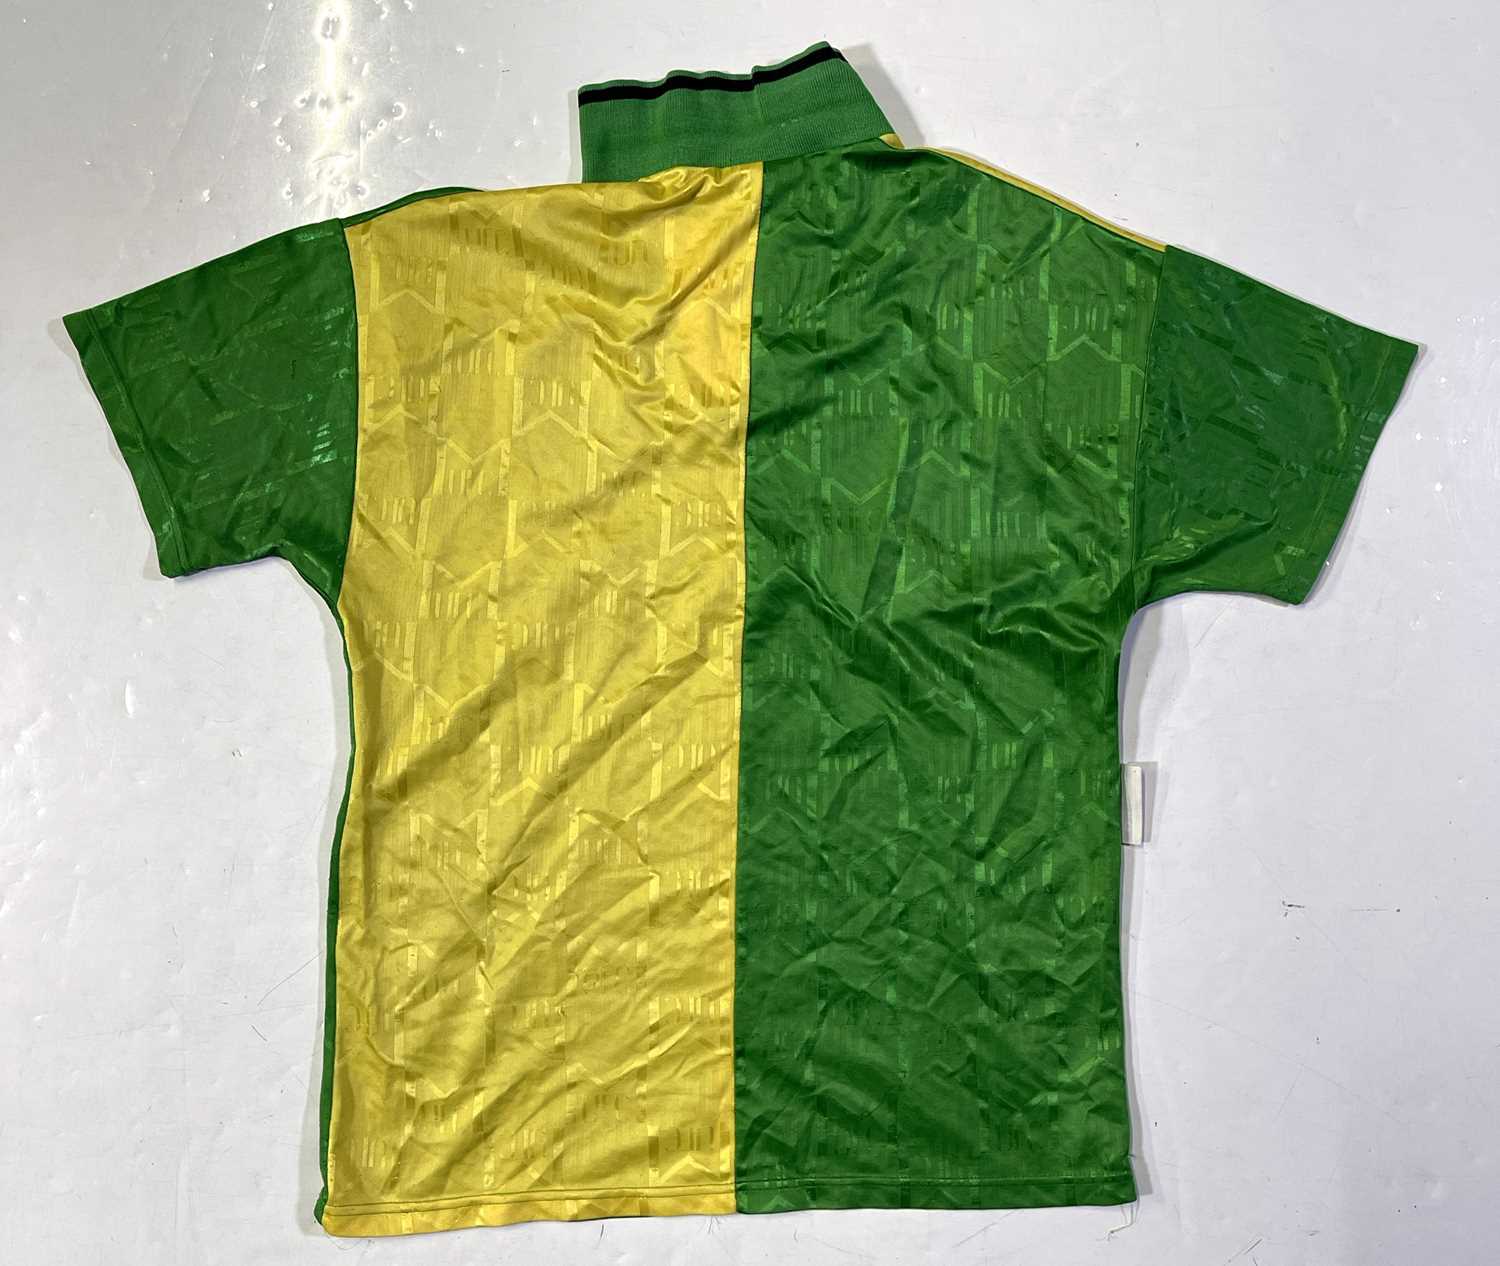 MANCHESTER UNITED FOOTBALL SHIRT - 1992-4 GREEN AND GOLD. - Image 2 of 2